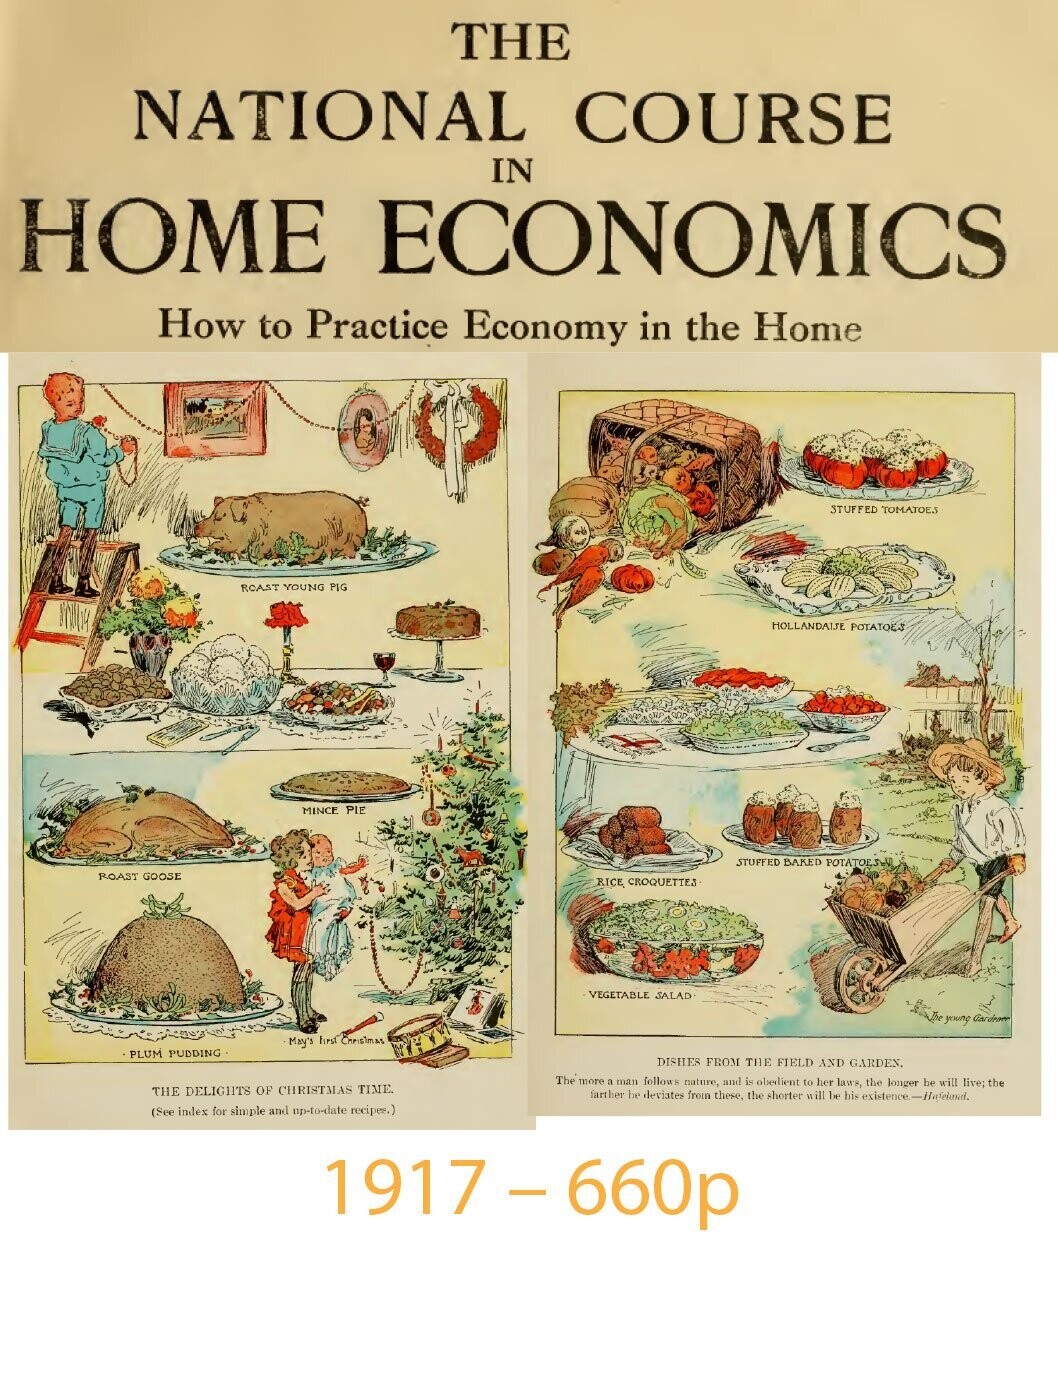 $2 Download. National Course in Home Economics. 1917 – 660p